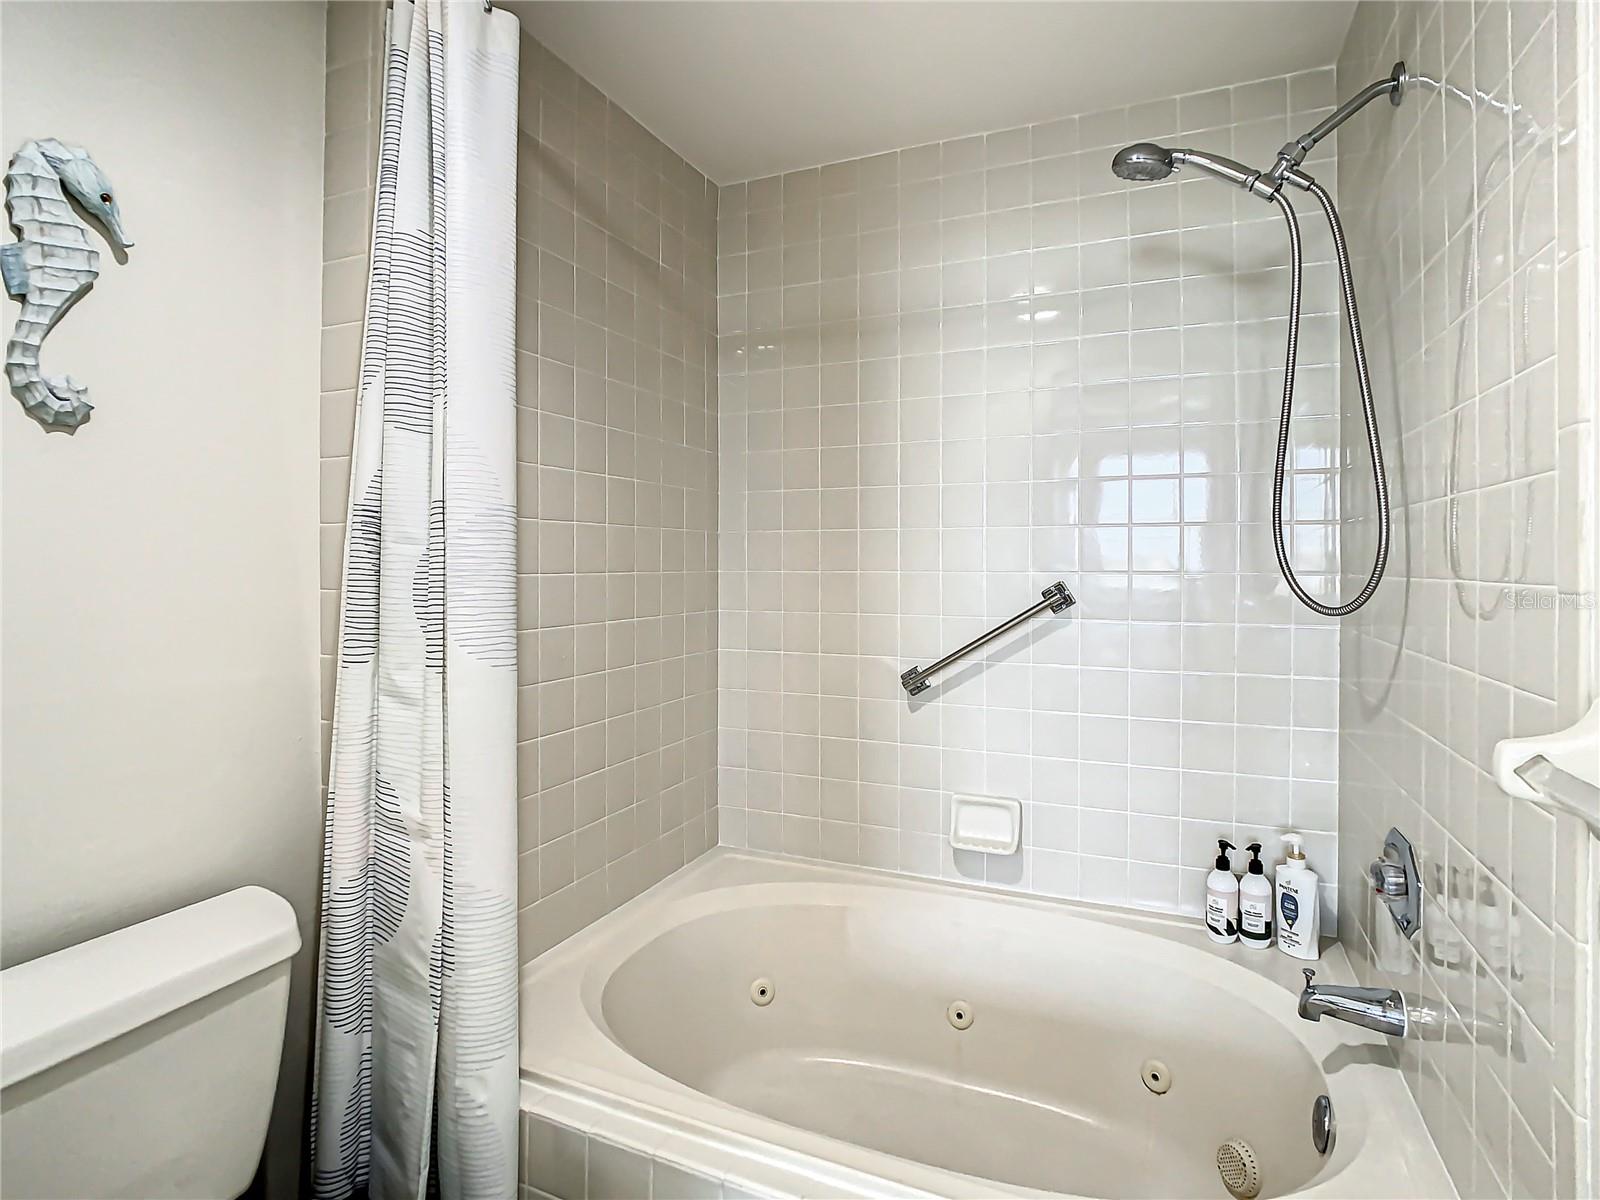 The main bathroom has a jetted tub with shower.